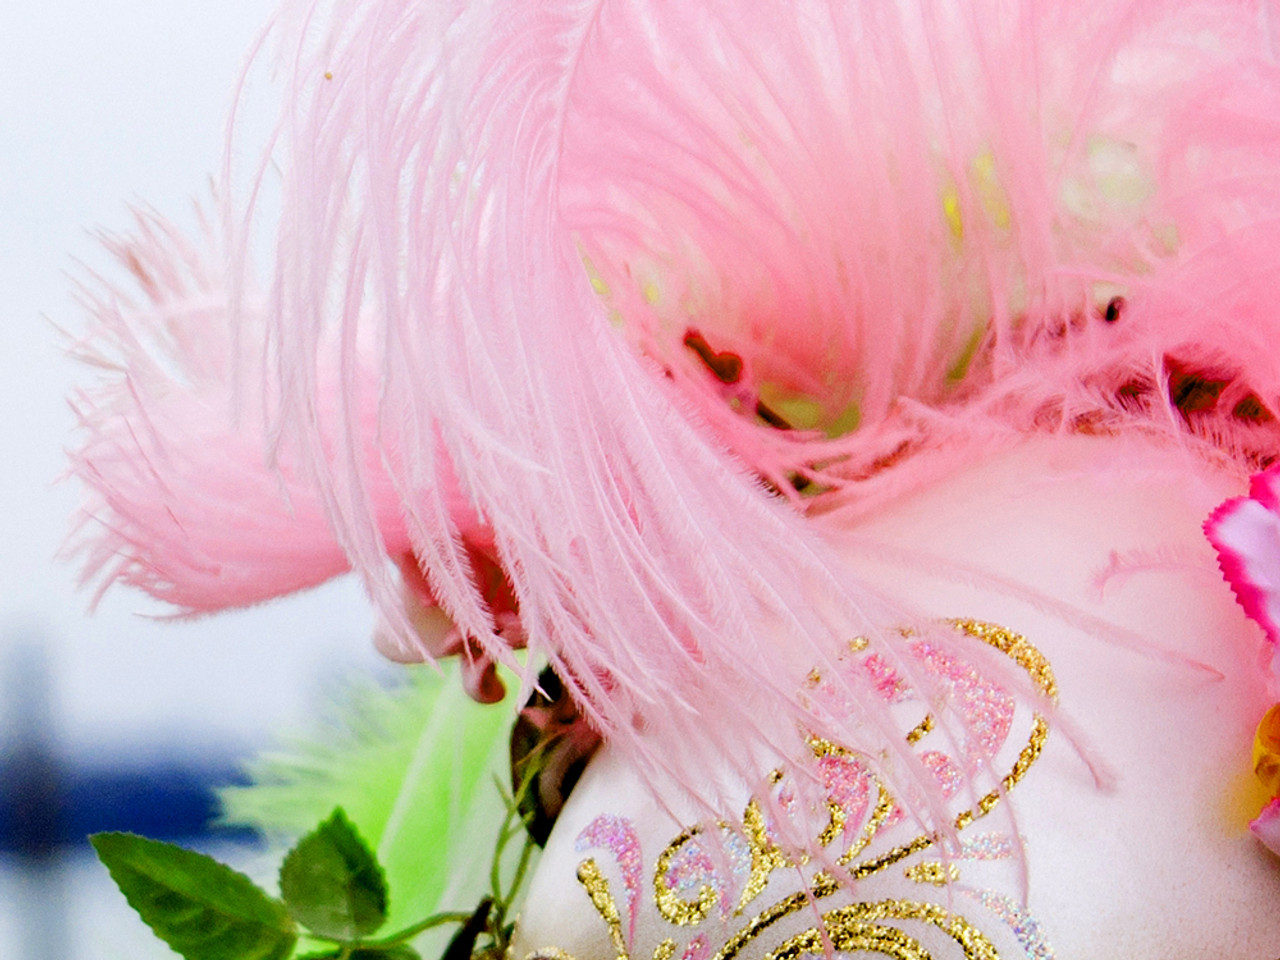 Baby Pink Ostrich Feathers/plumes/wings Wholesale Bulk Dozen Cheap Discount  22-24 inch 5 Pieces Wedding Centerpieces and Crafts inidan feathers larger  feathers